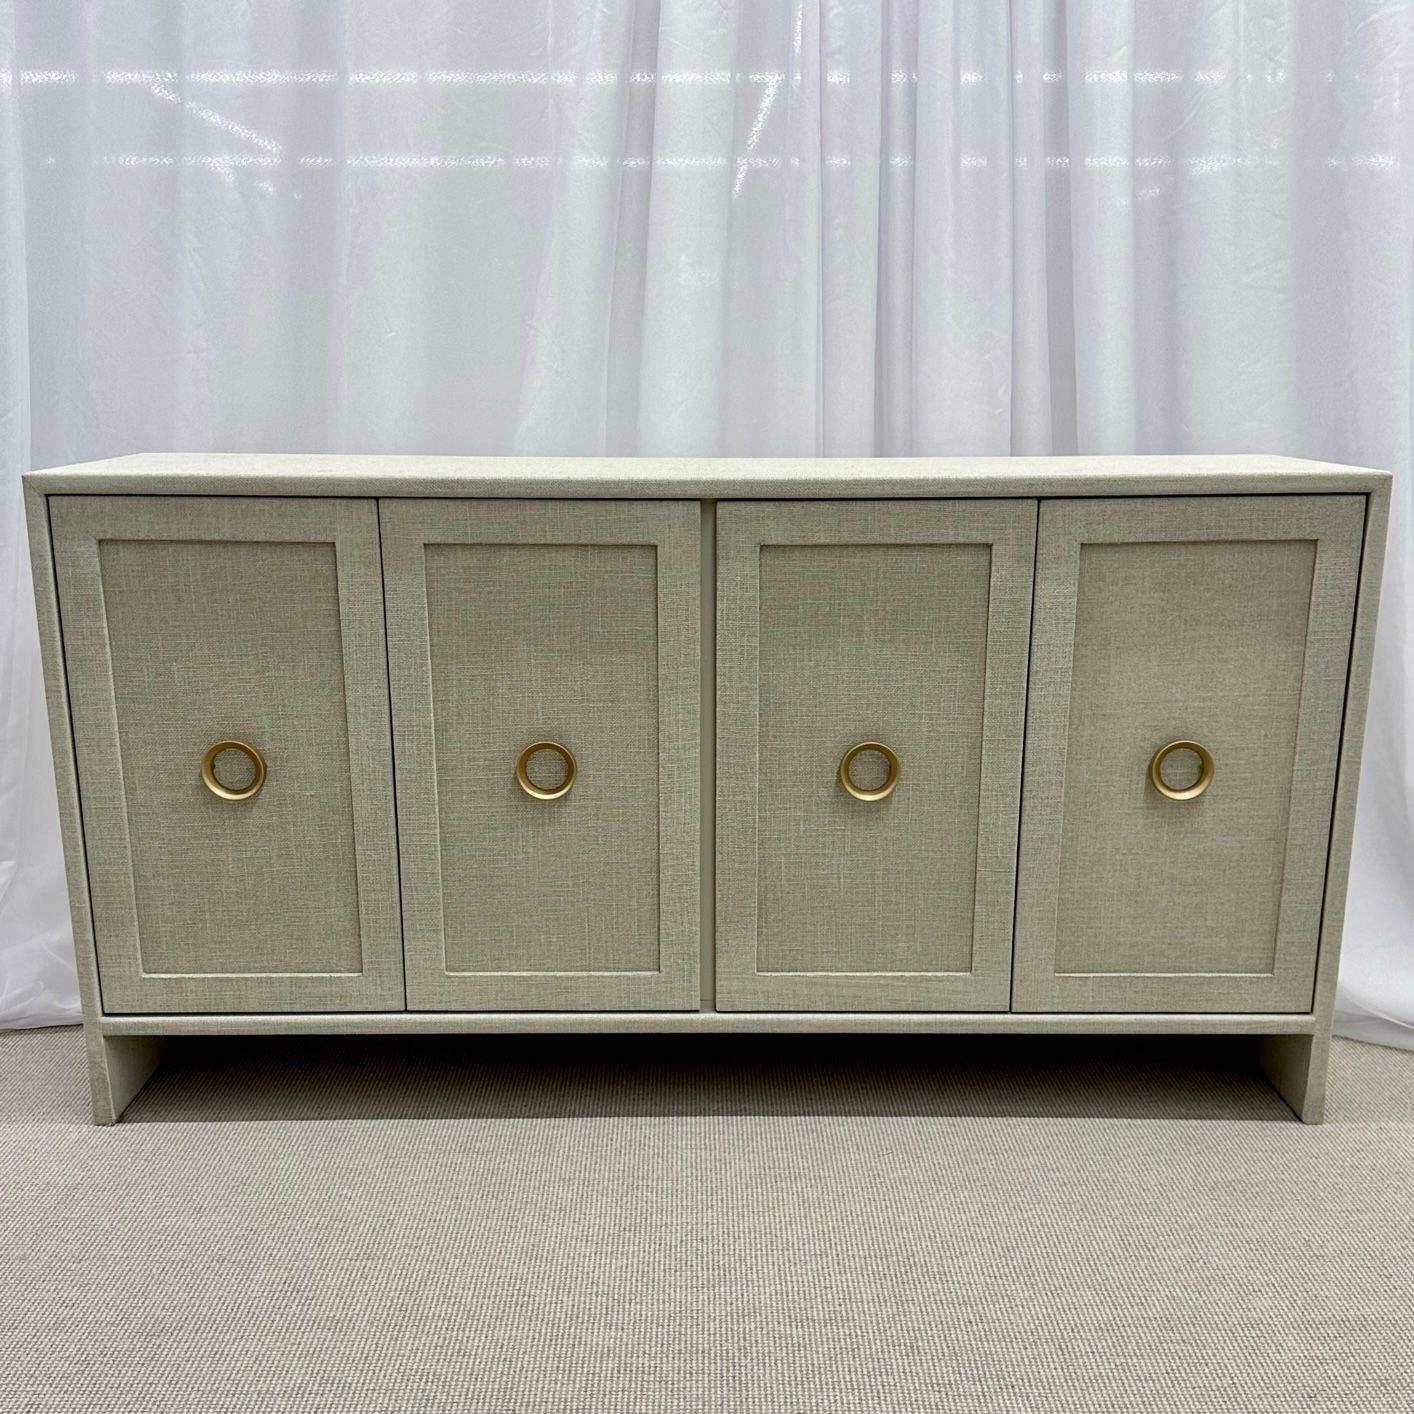 American Modern White Custom Four Door Linen Wrapped Sideboard / Credenza, Brass